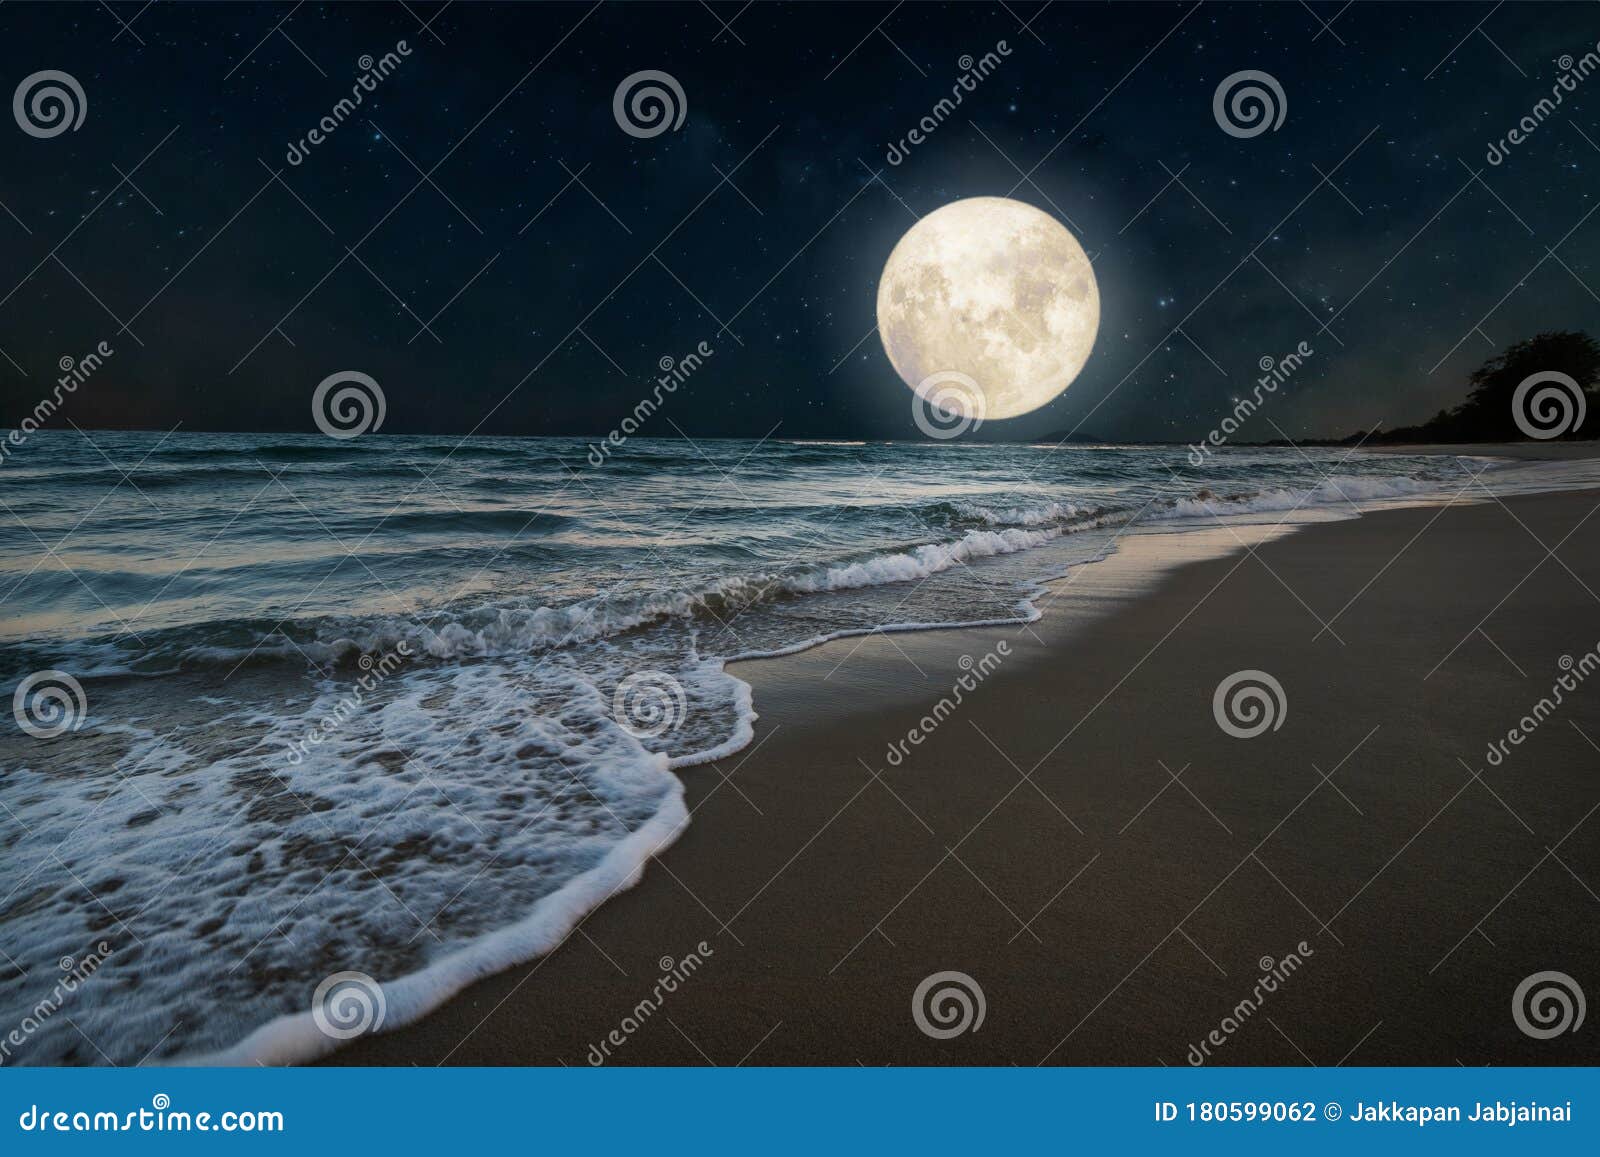 romantic beach and full moon with star.